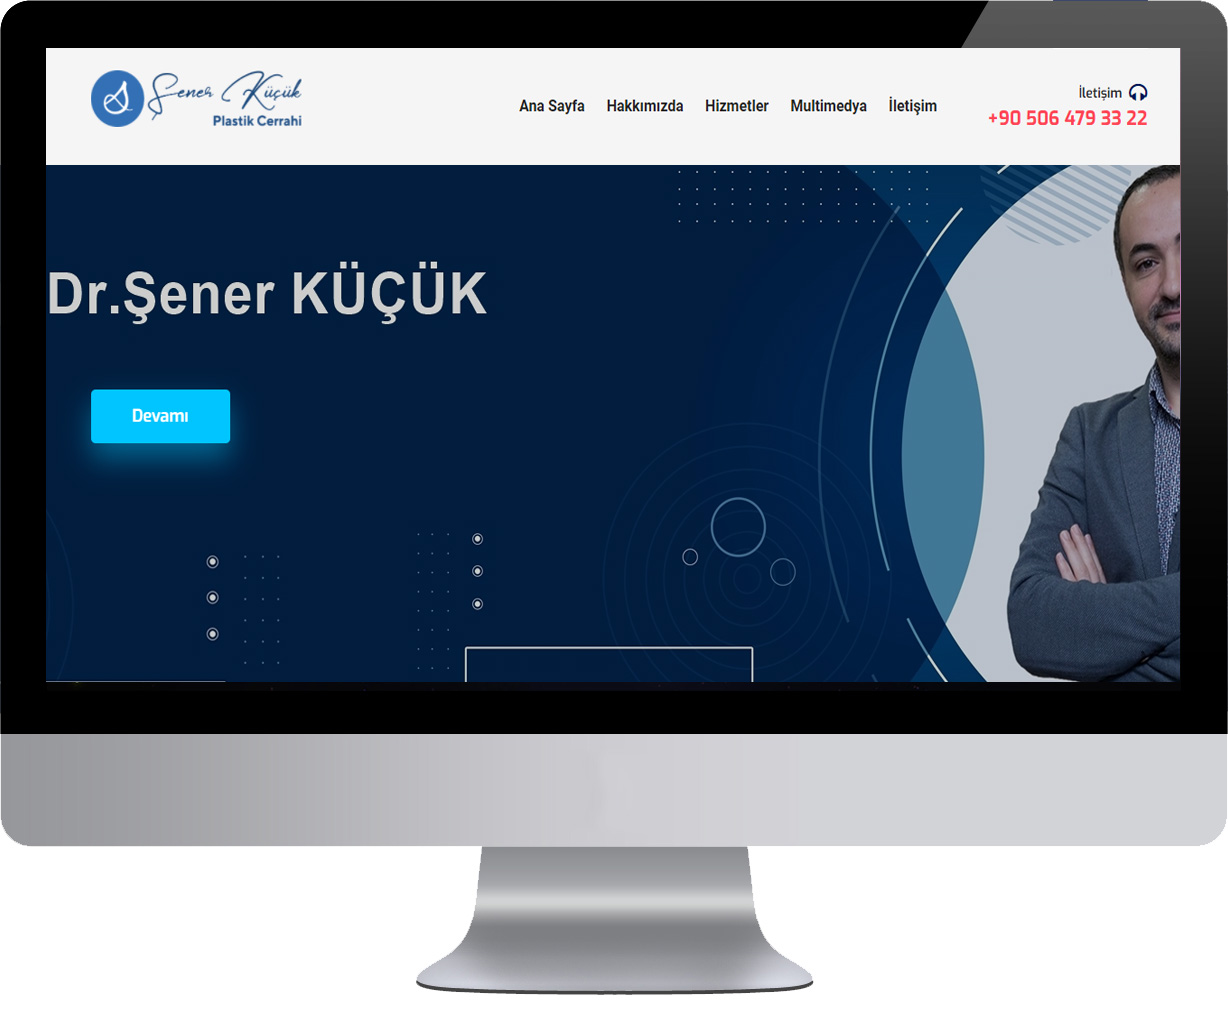 senerkucuk.com is here with its renewed face!